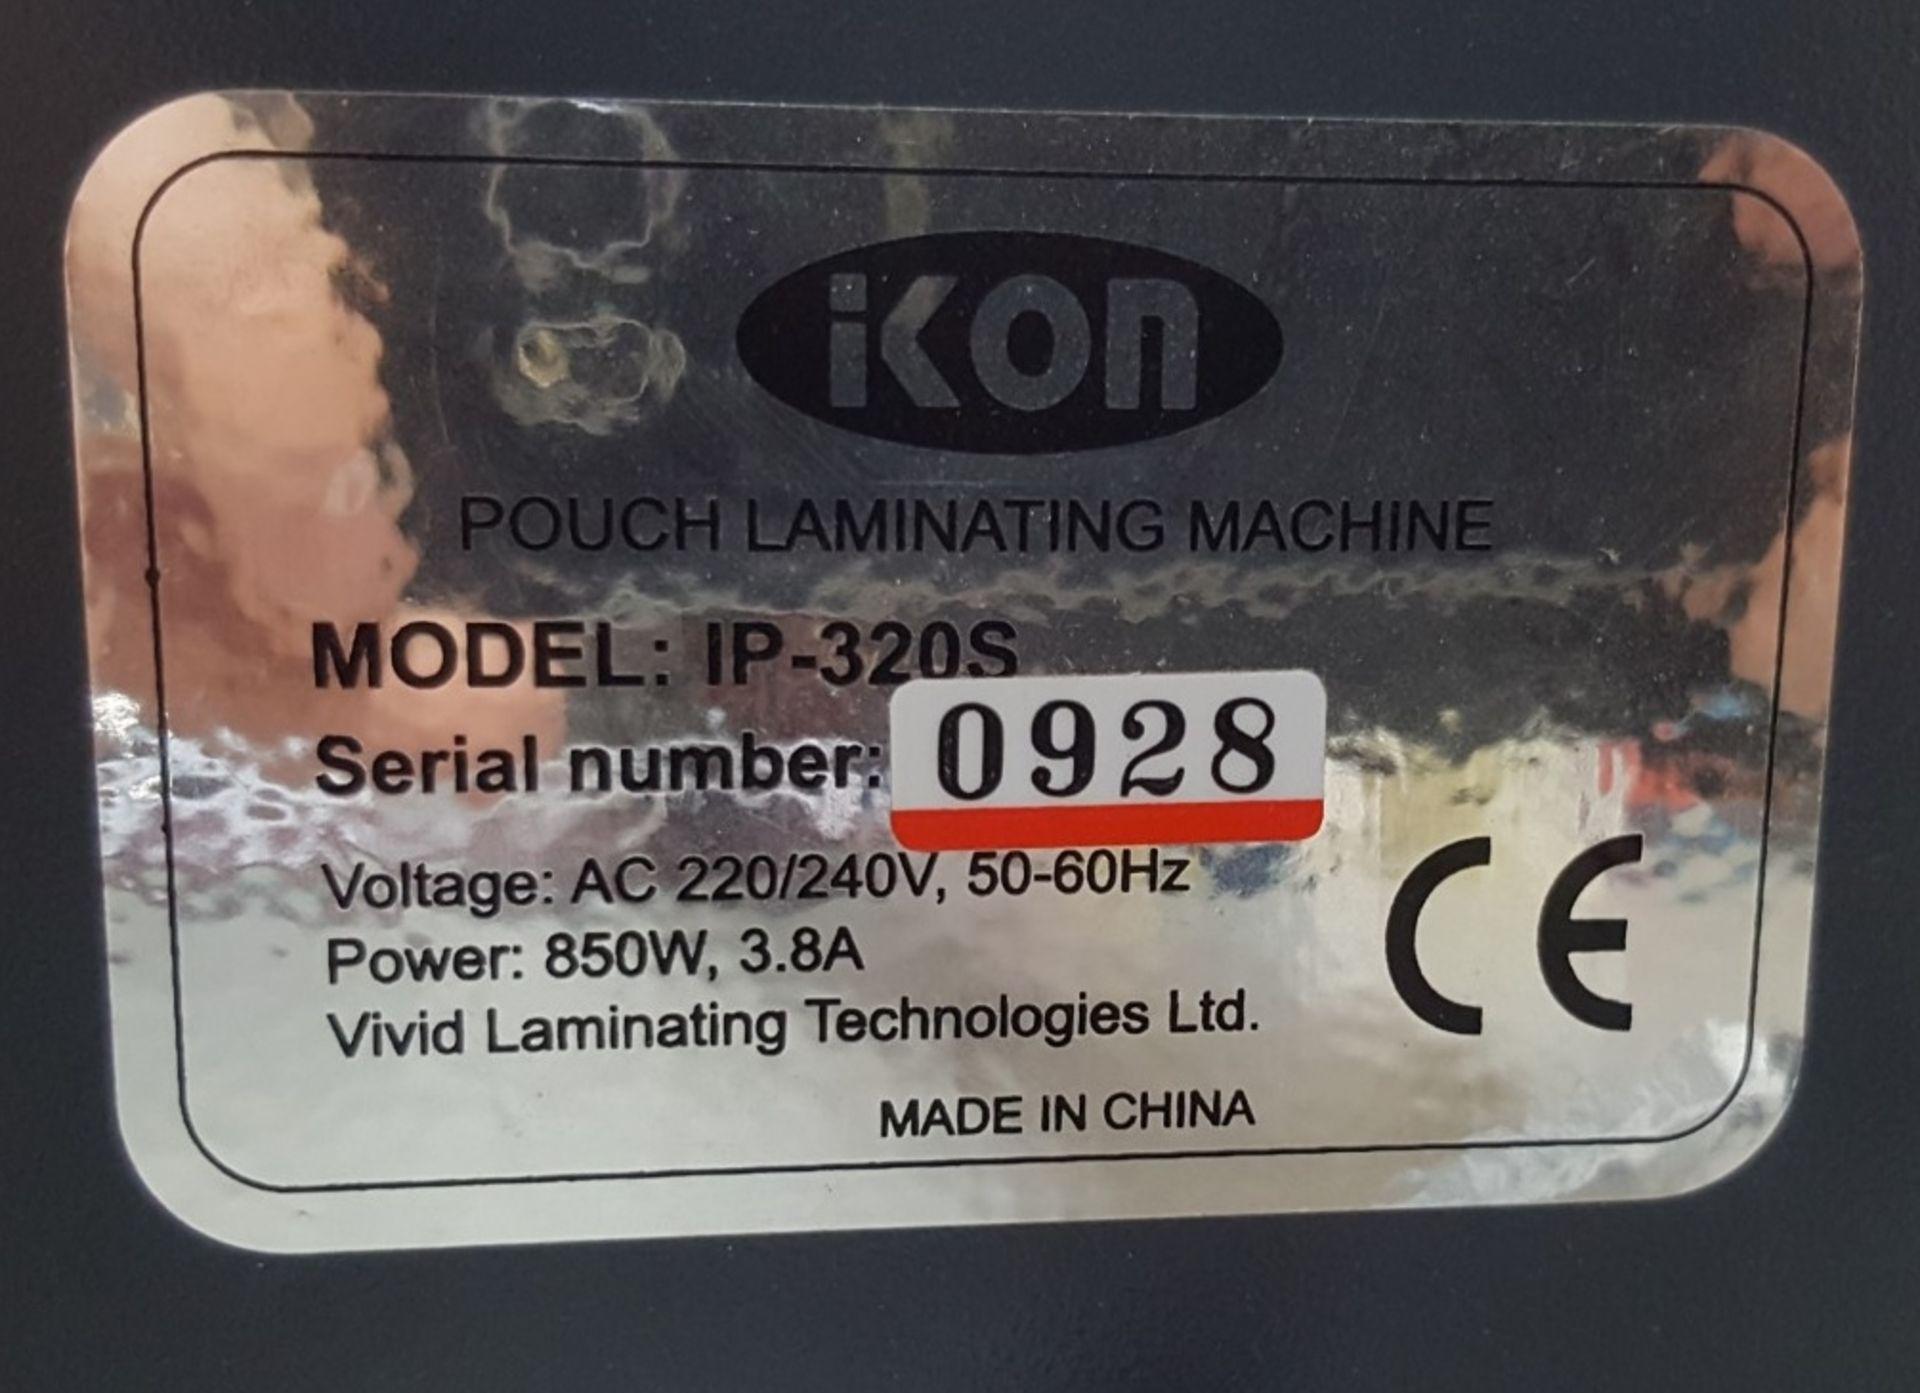 1 x IKON IP-320s Pouch Laminating Machine - Ref LD390 - Image 2 of 5